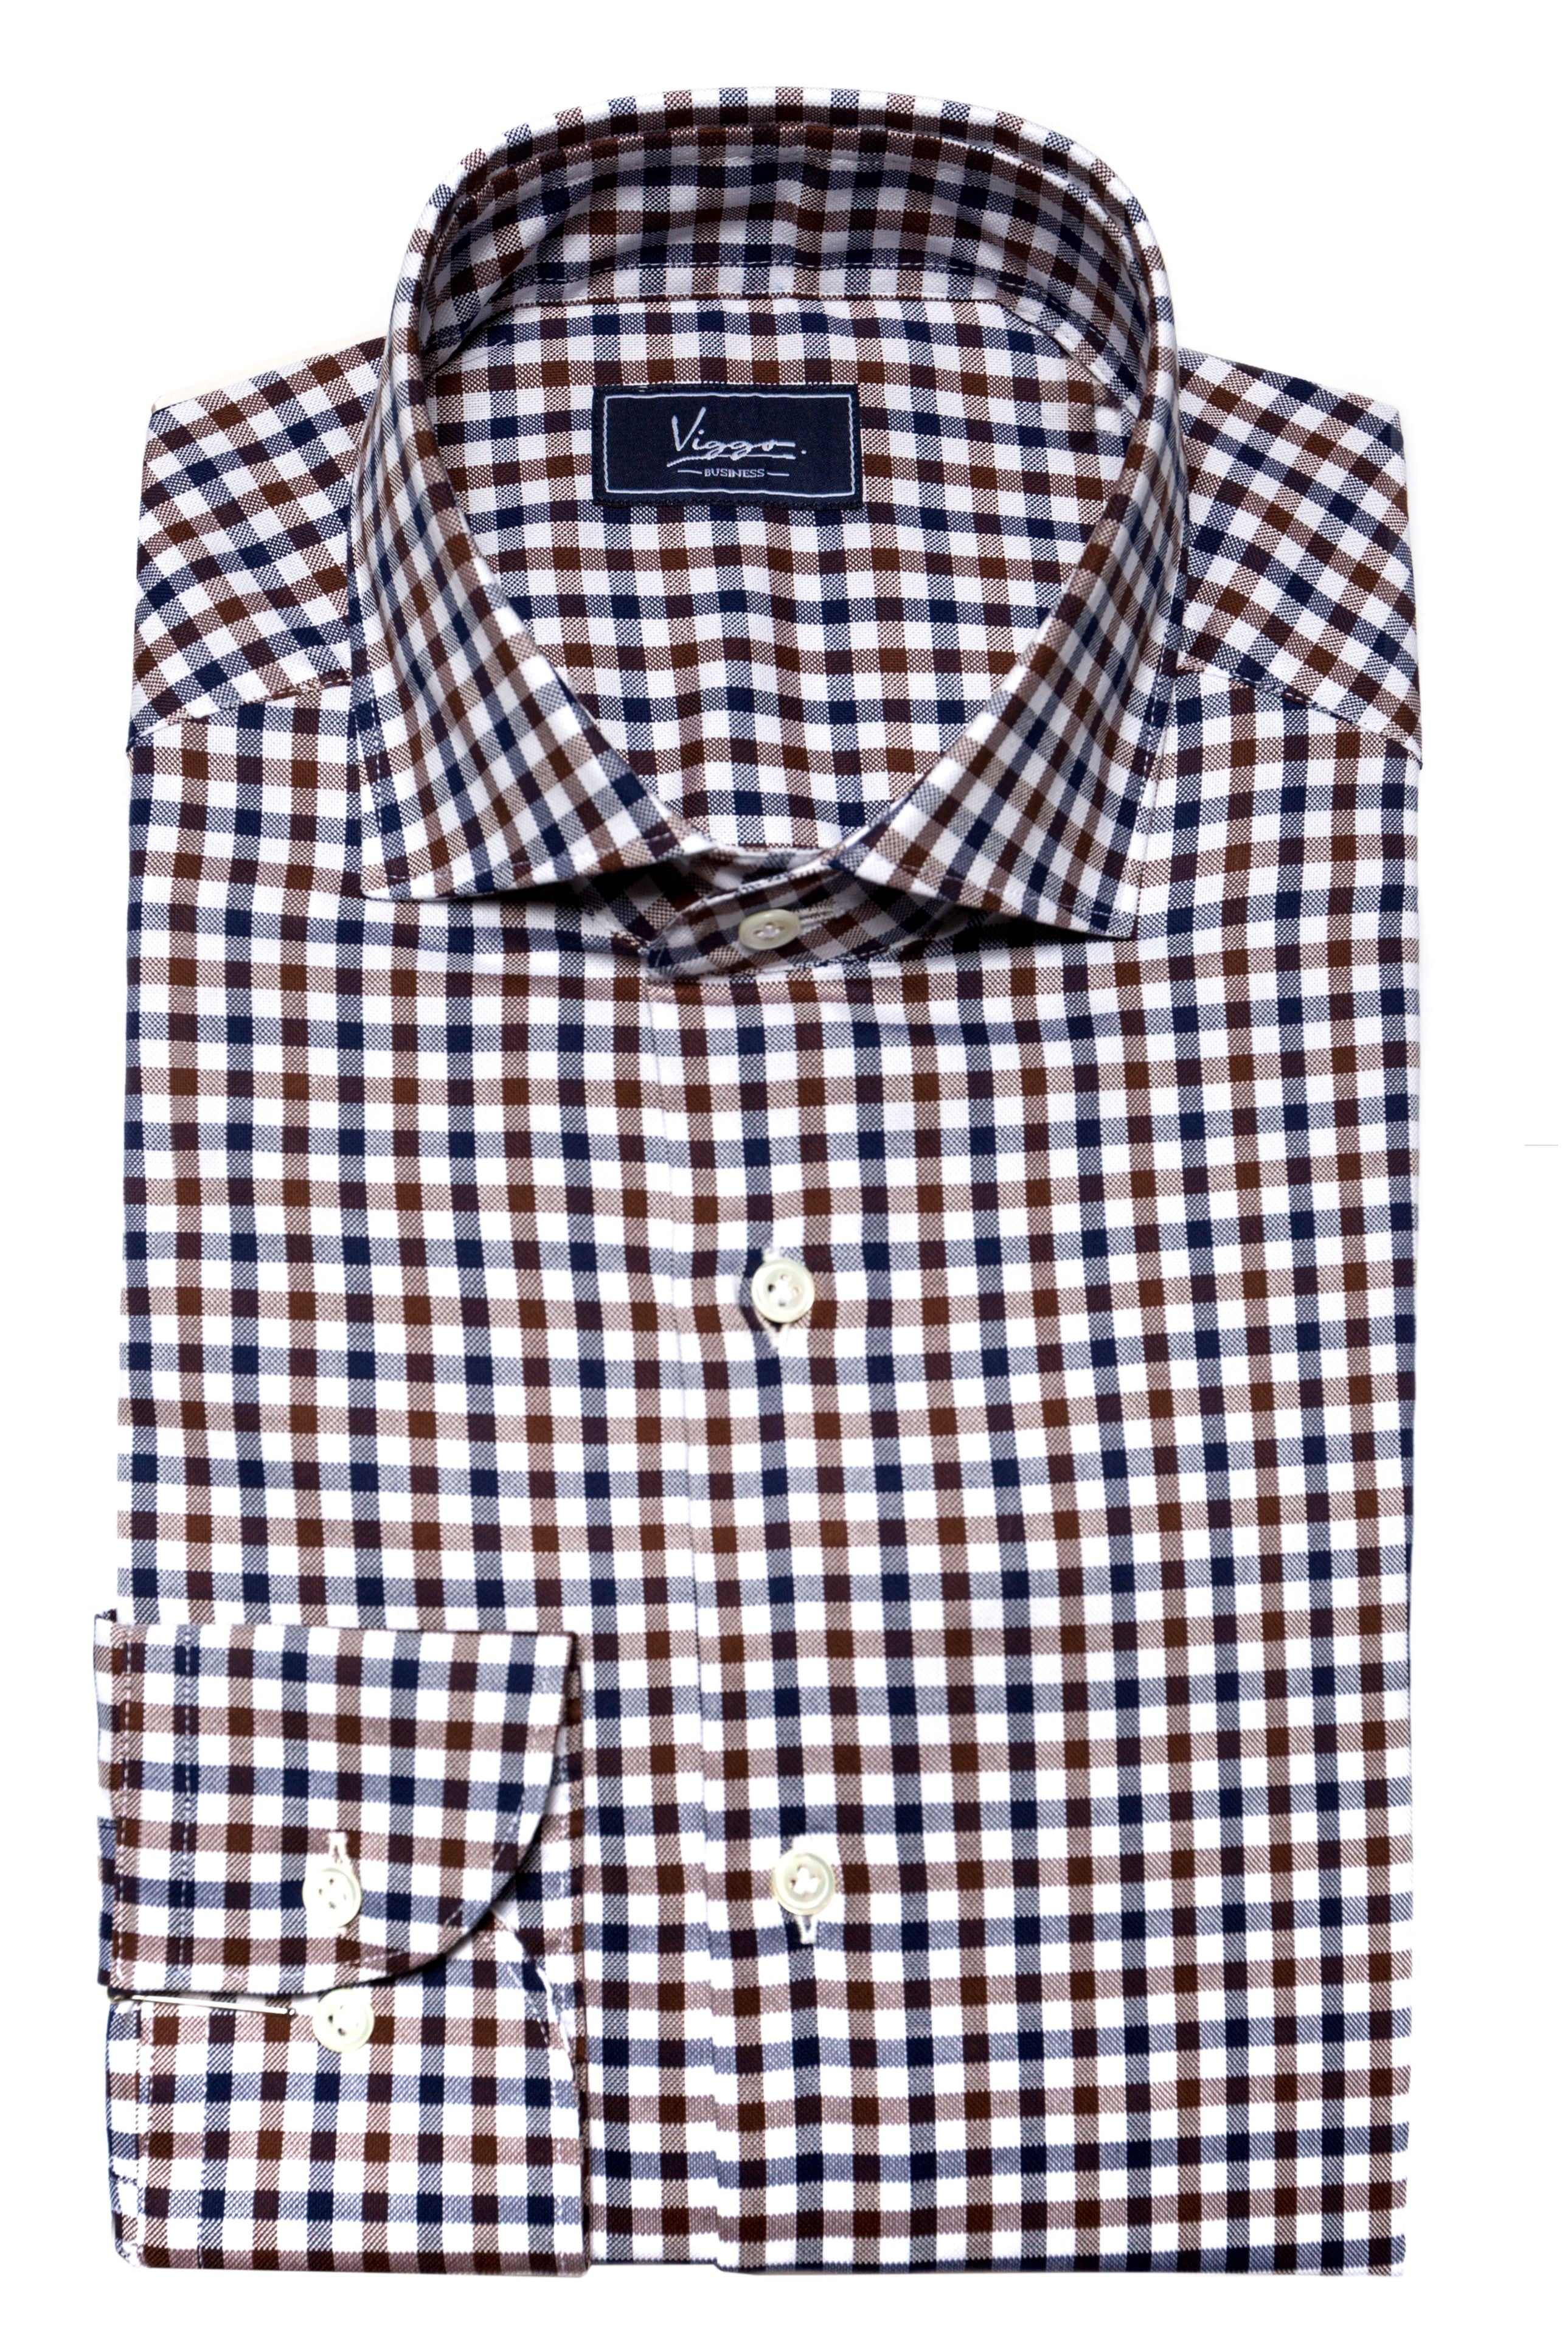 White shirt with blue and brown squares